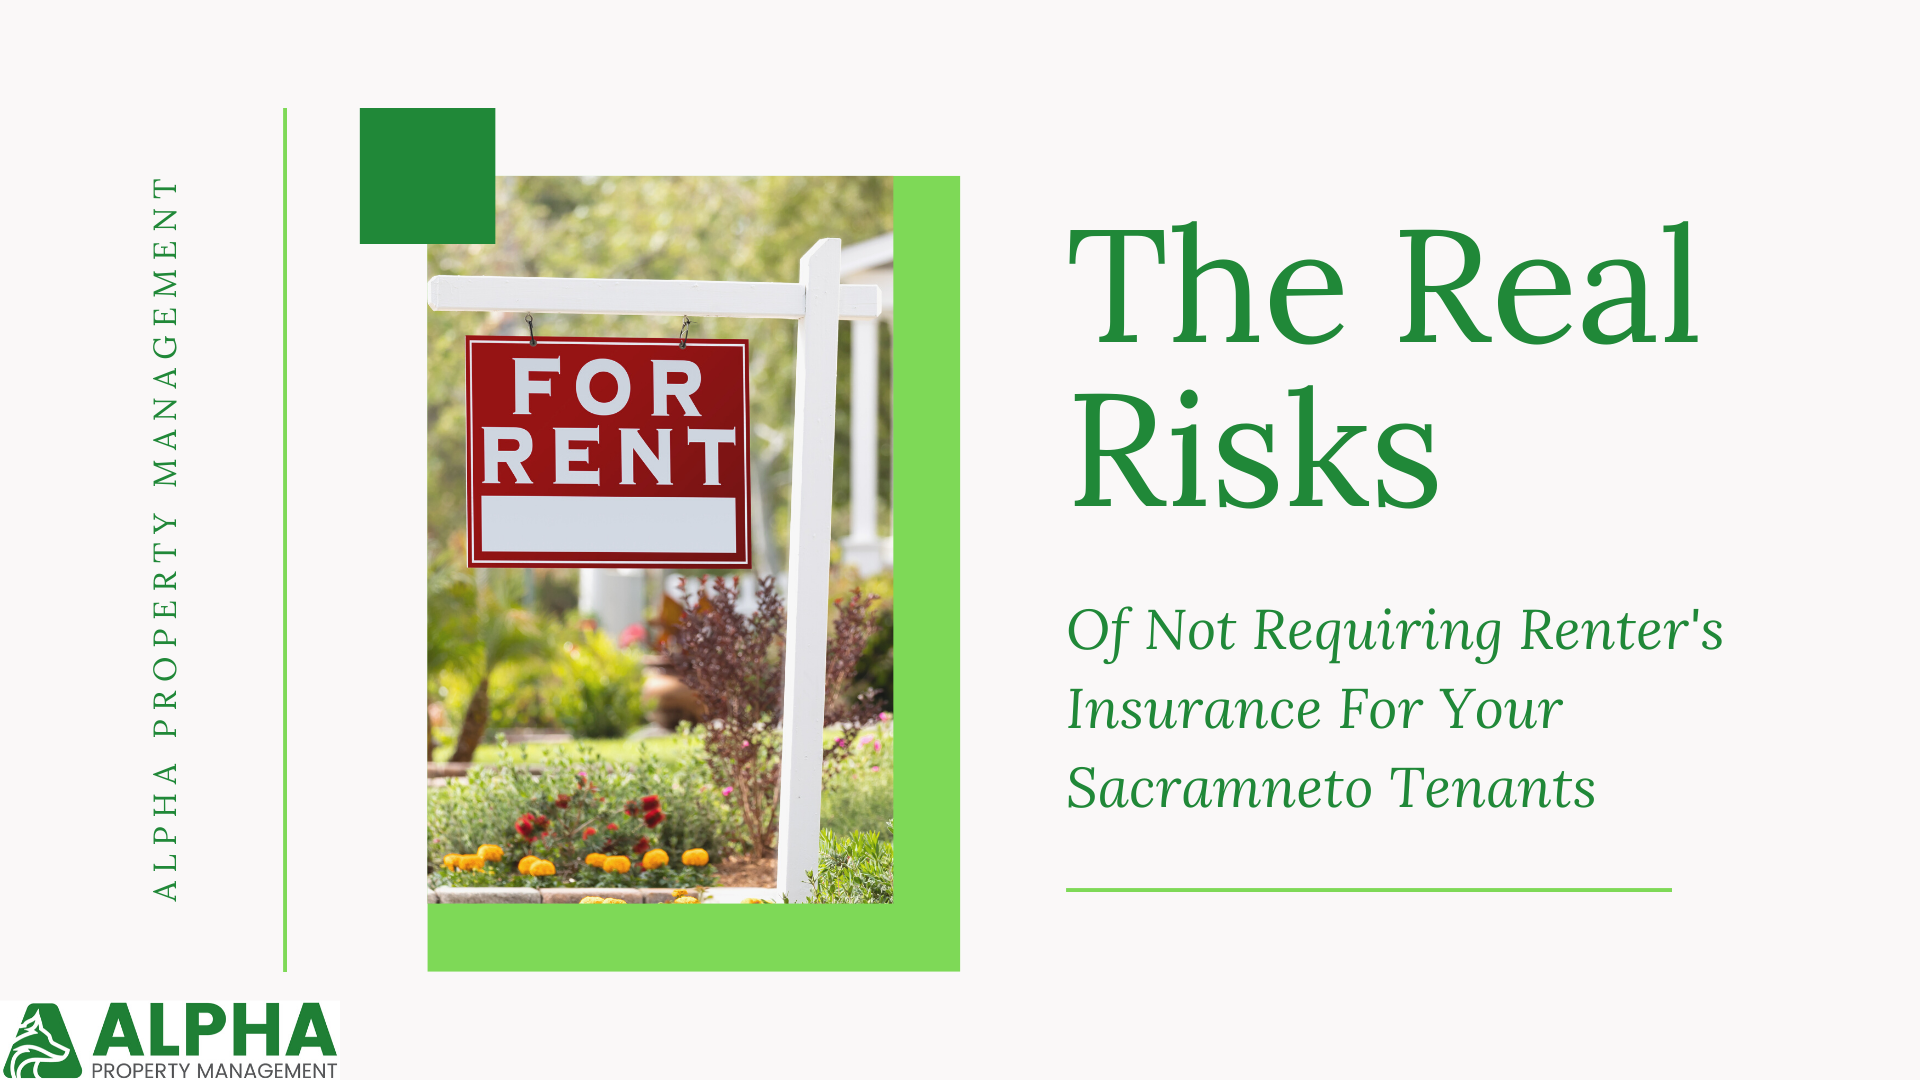 For rent sign with text - The Real Risks Of not Requiring Renter's Insurance for Your Sacramento Tenants